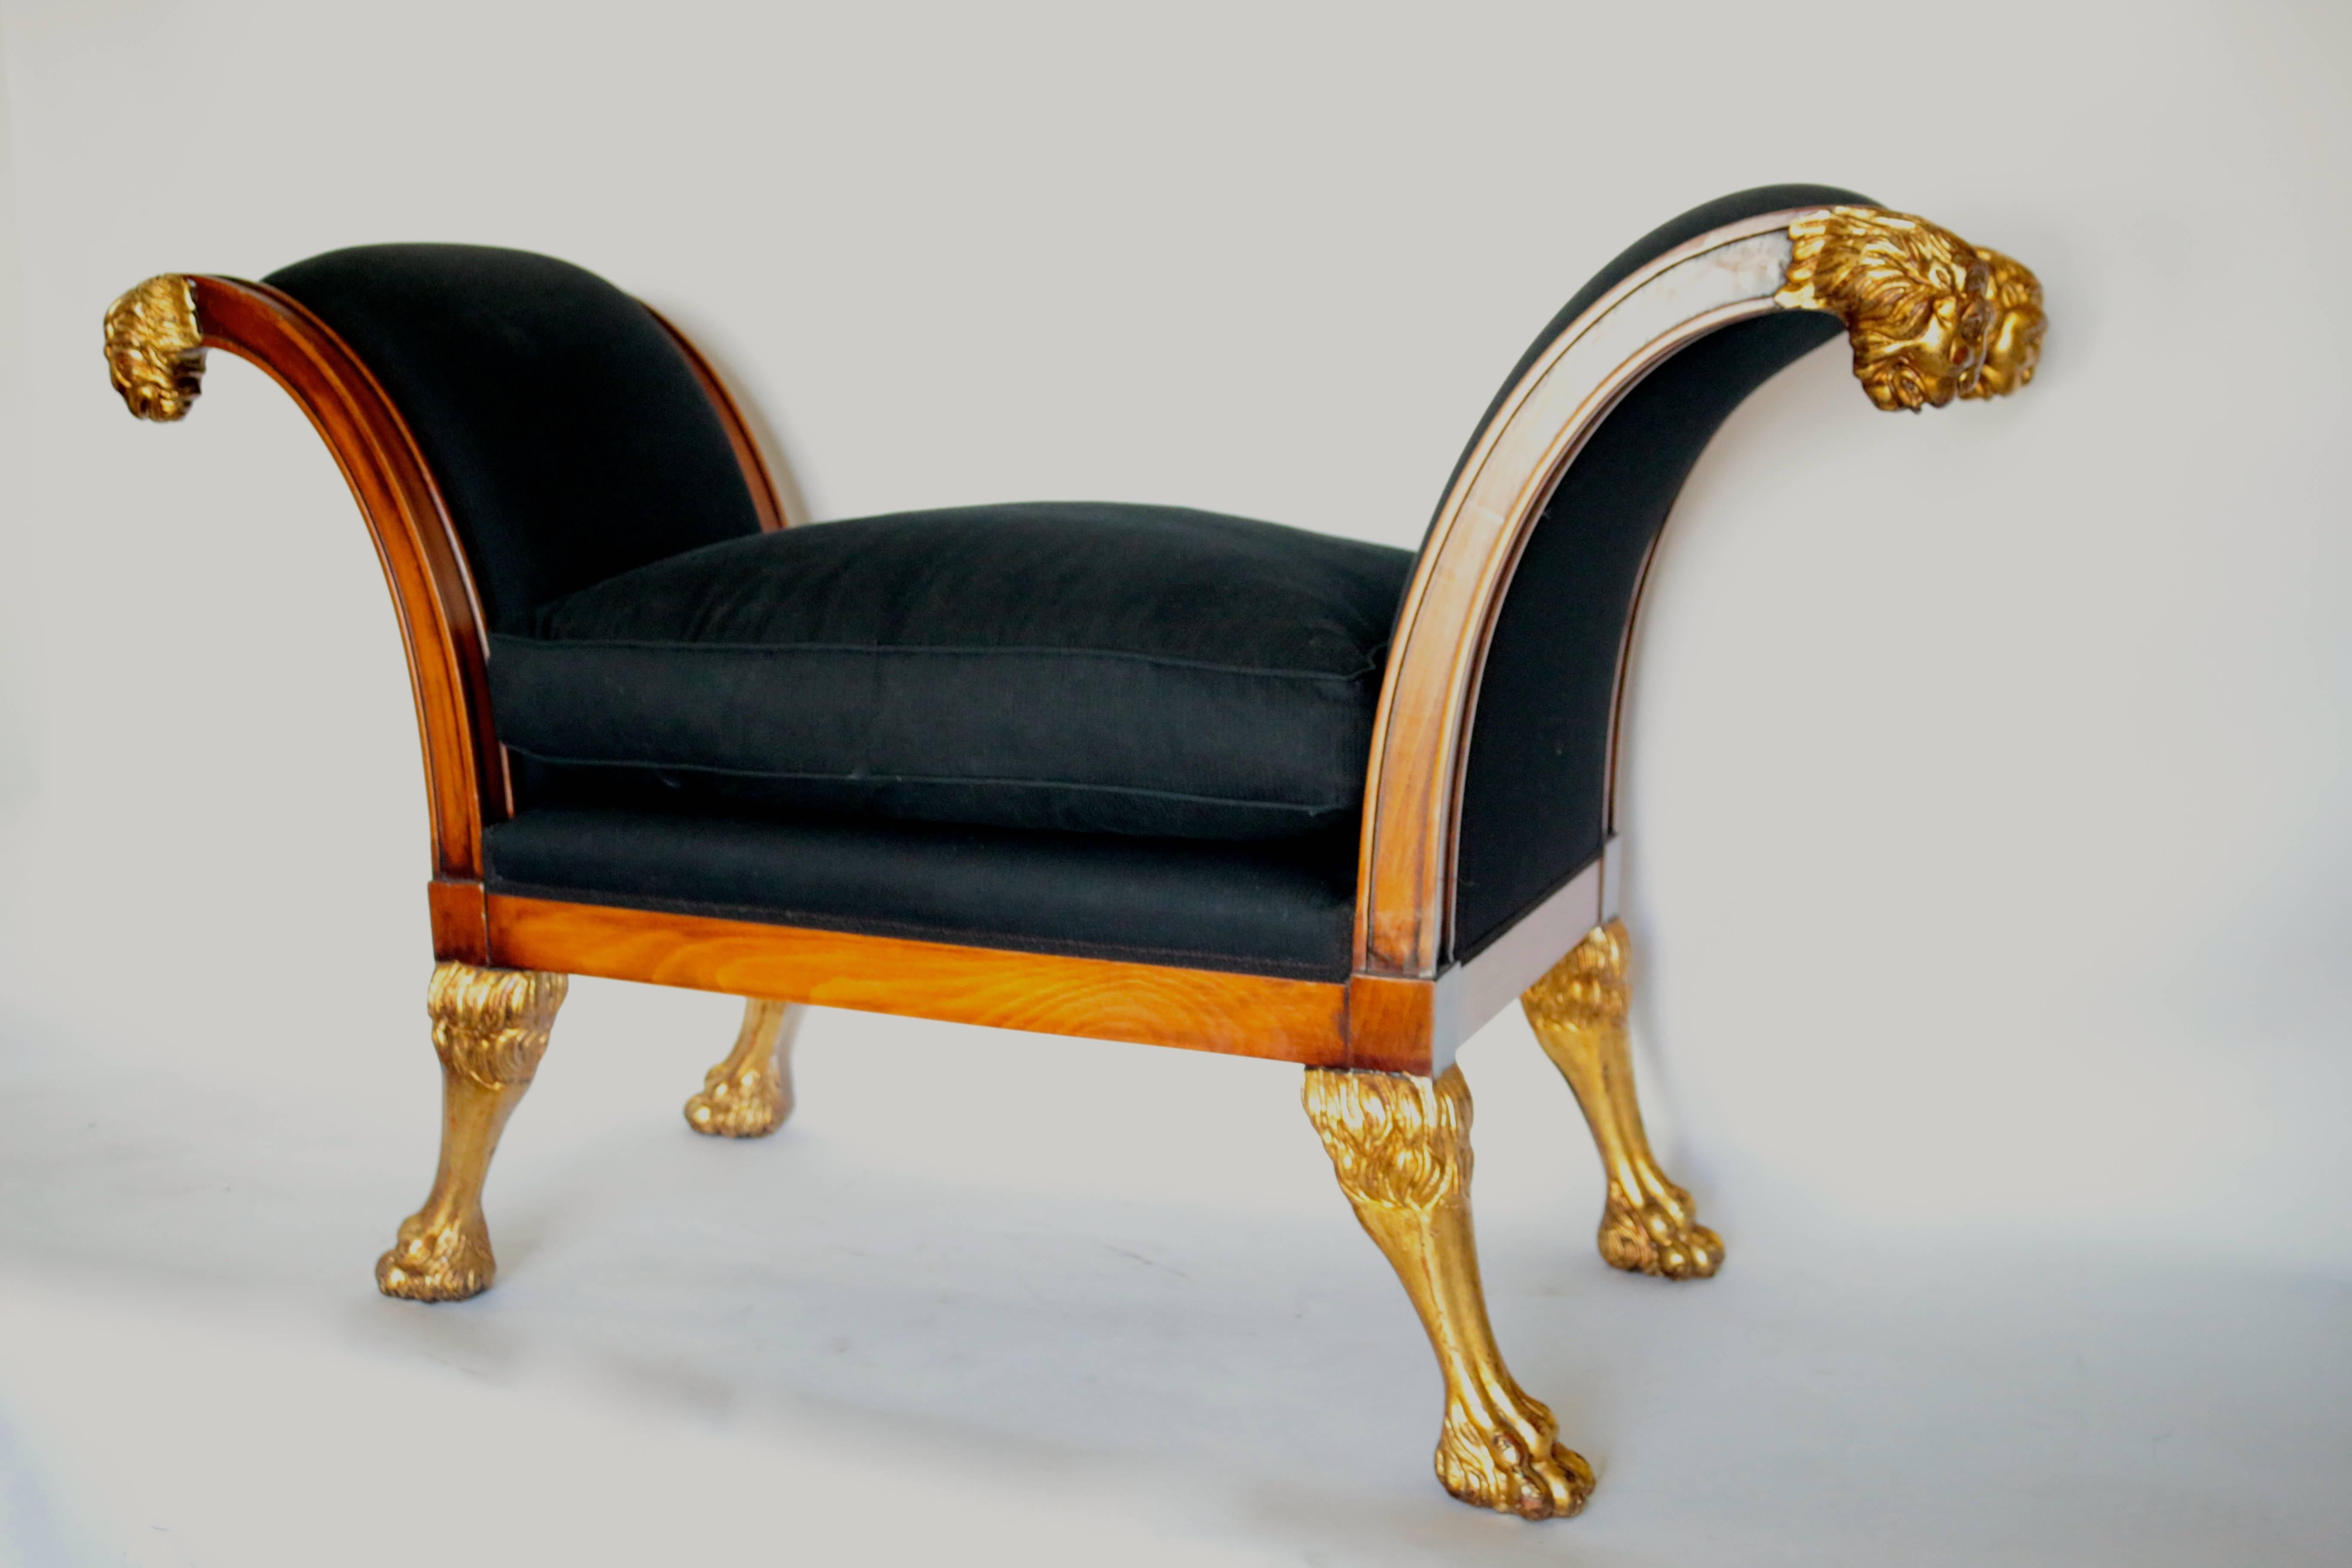 Property from the collection of Tommy Hilfiger.
Hand-carved Lion heads gilded wood bench.
In excellent used condition.